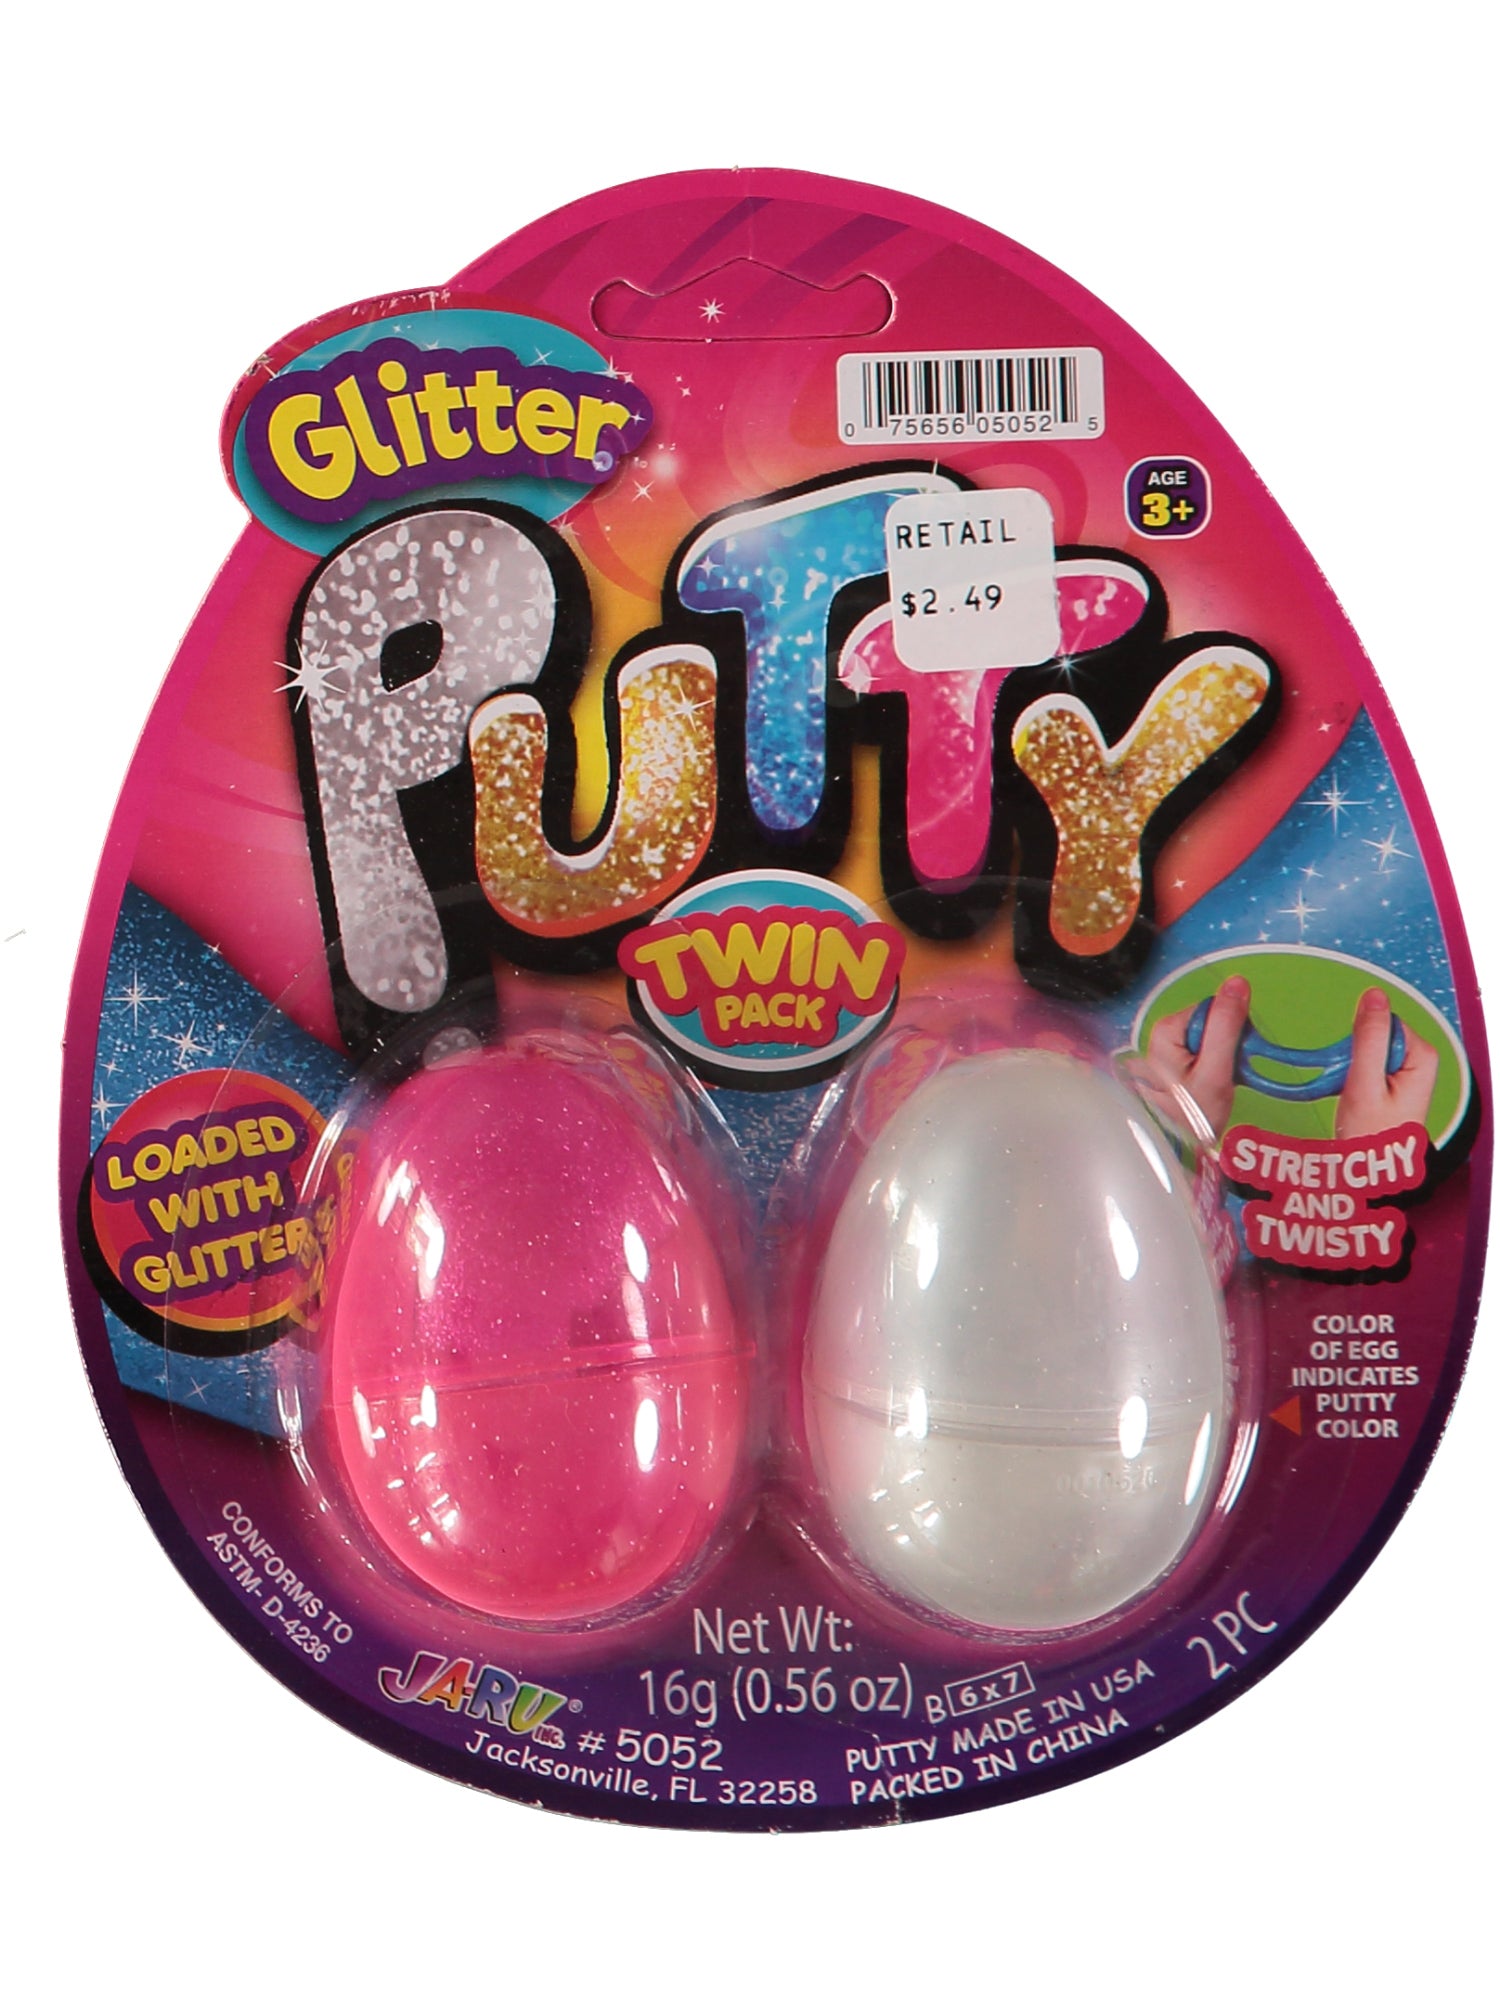 Ja-Ru Silly Putty 2-Pack, Assorted Colors